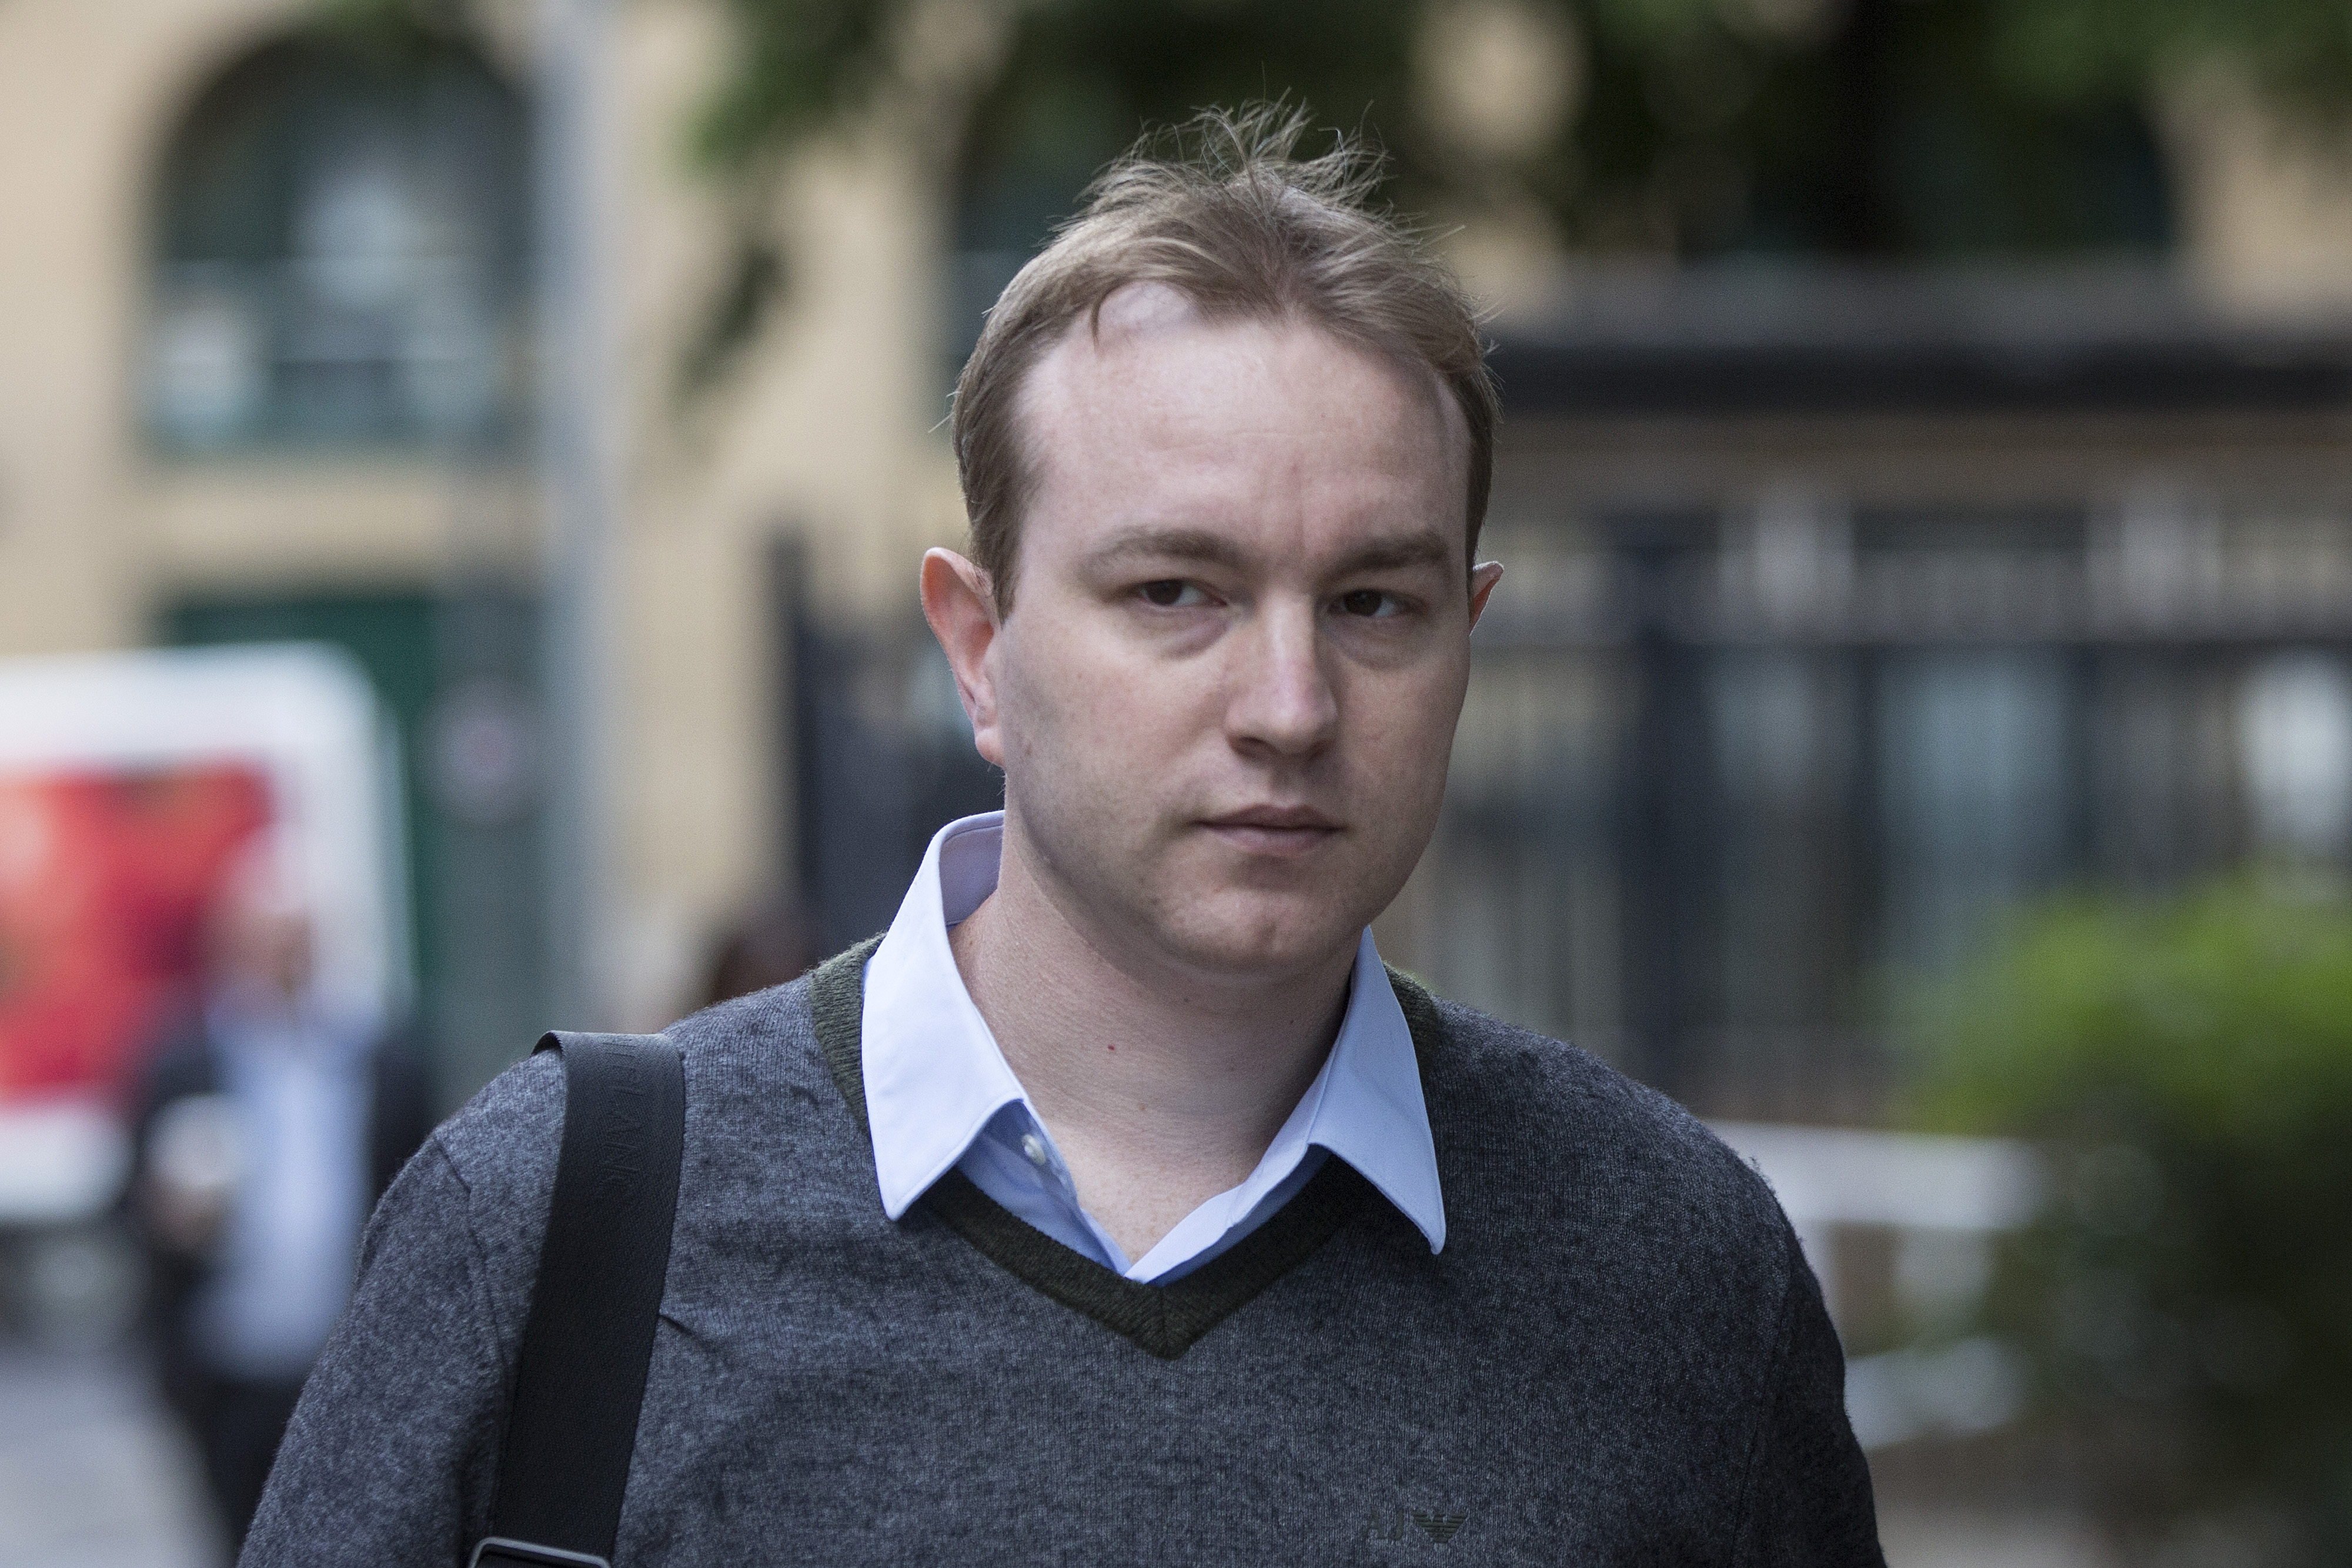 Tom Hayes, a former trader at banks including UBS Group AG and Citigroup Inc., arrives for his trial at Southwark Crown Court in London, on June 3, 2015.
